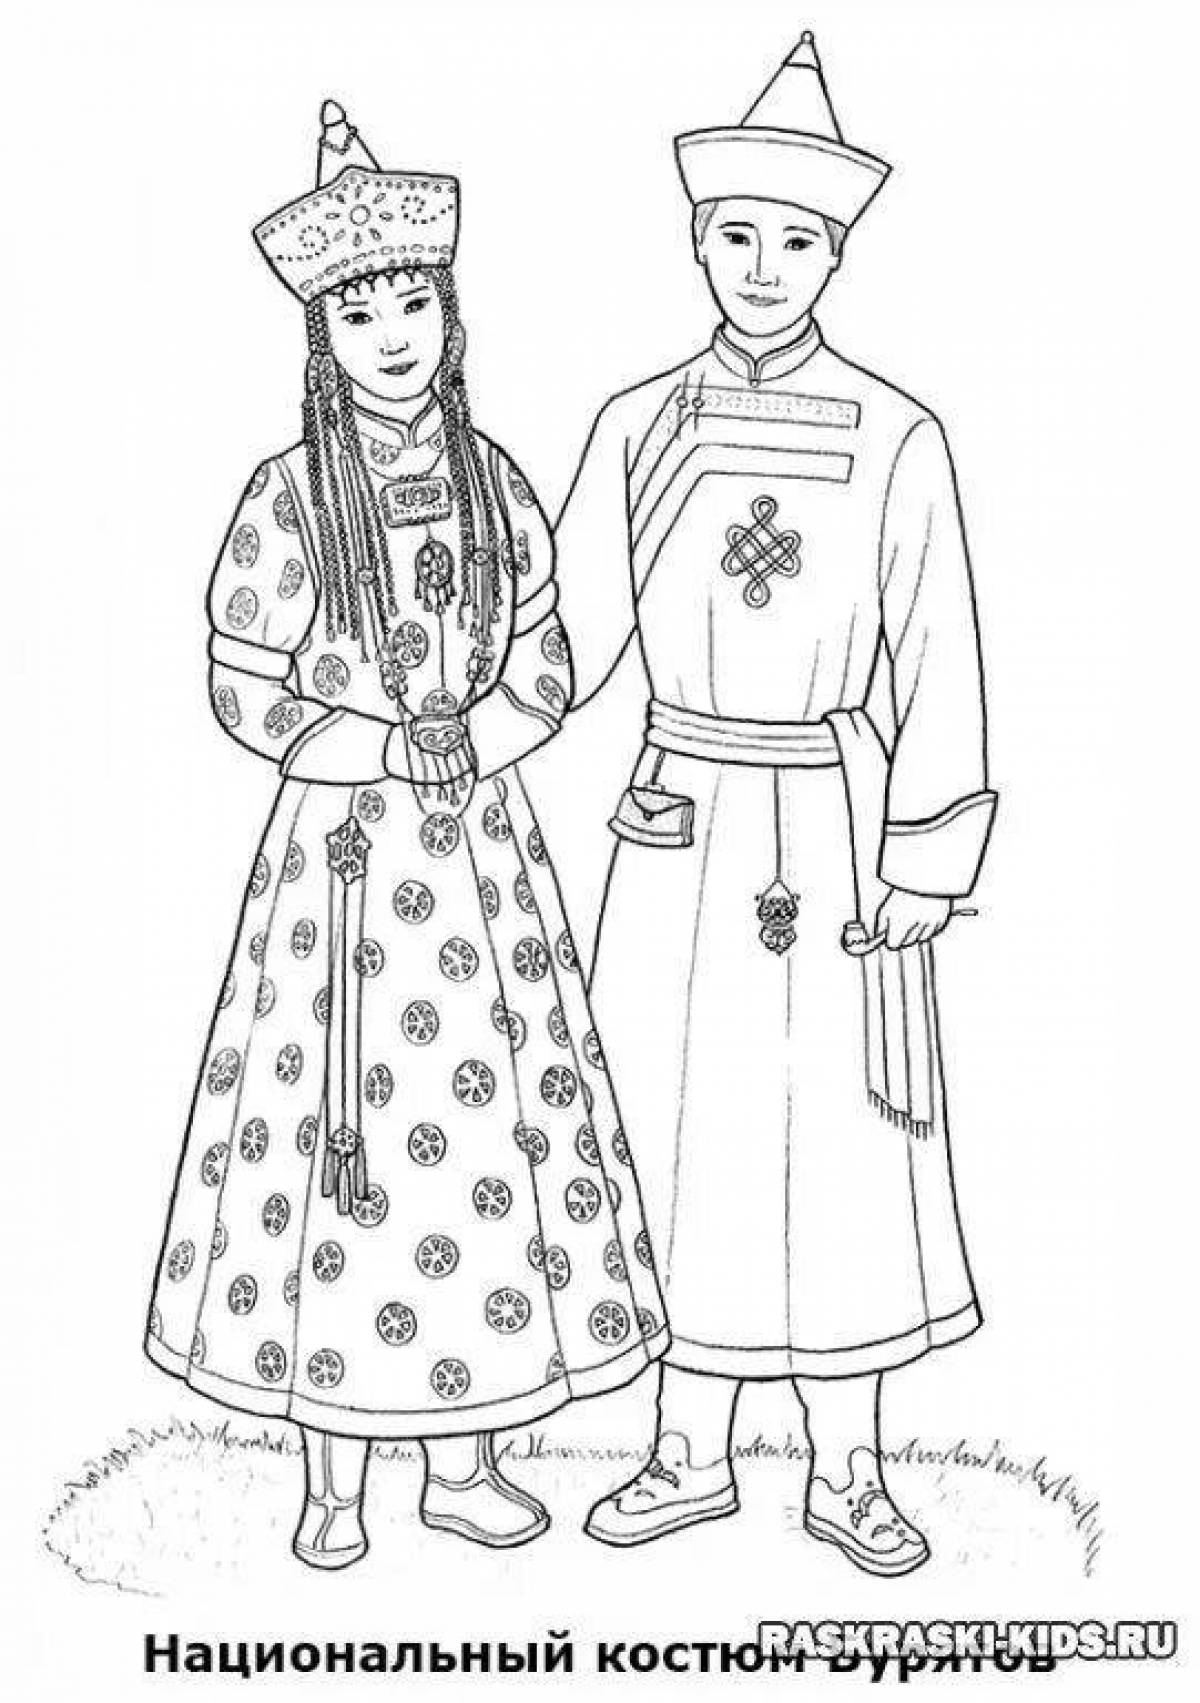 Costumes of the peoples of Russia #12